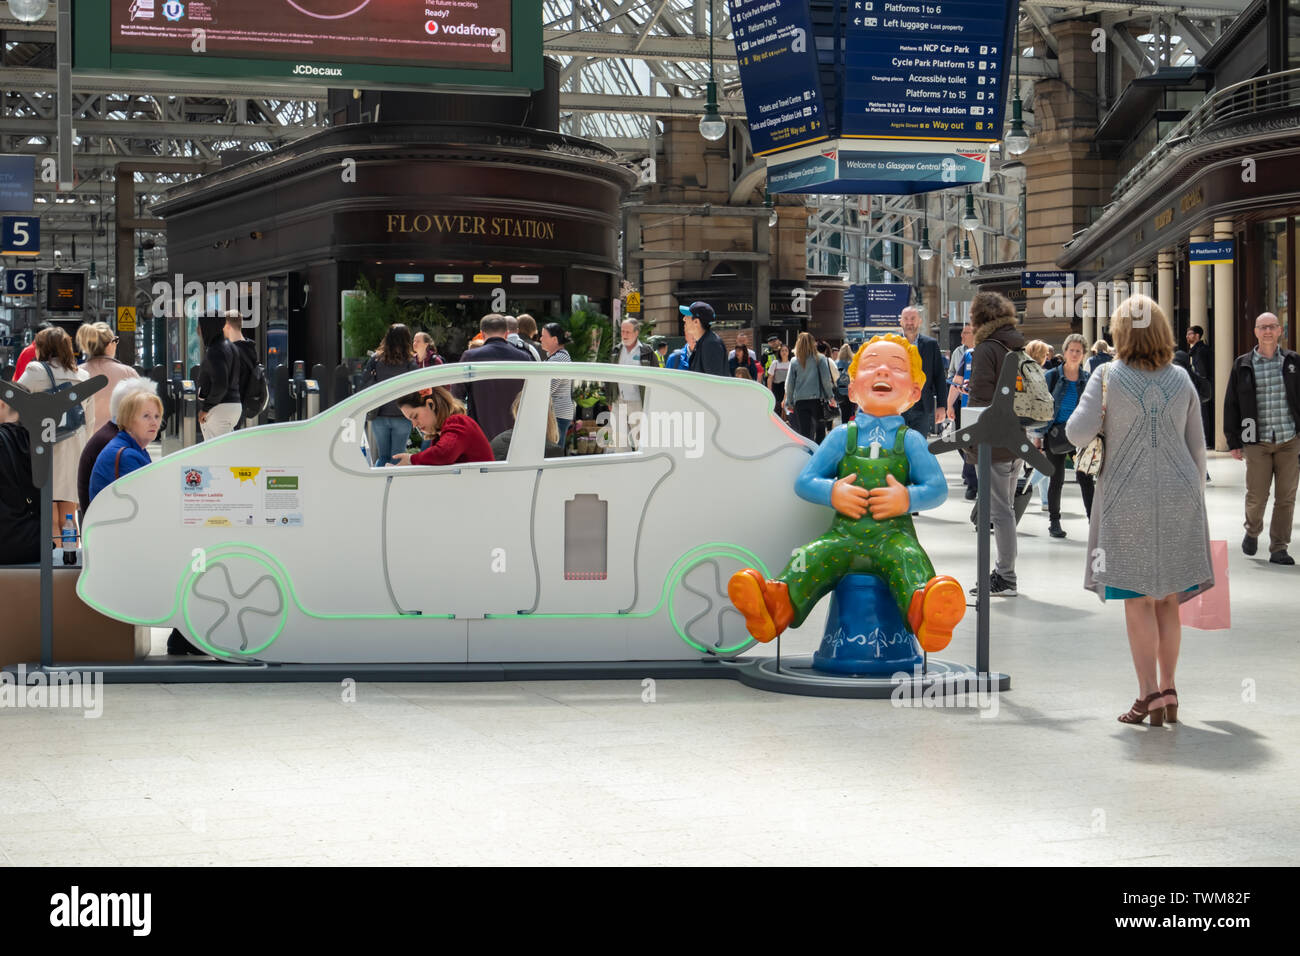 Glasgow, Scotland, UK. 21st June, 2019.Yer Green Laddie, created by 24 Design Ltd. ‘Yer Green Laddie’ is looking to get his car charged before travelling around Scotland on his BIG Bucket Trail… but he needs your help! Spin the turbines to get him and his car on the go with ‘Green Power’. The sculpture is part of Oor Wullie’s BIG Bucket Trail. Credit: Skully/Alamy Live News Stock Photo